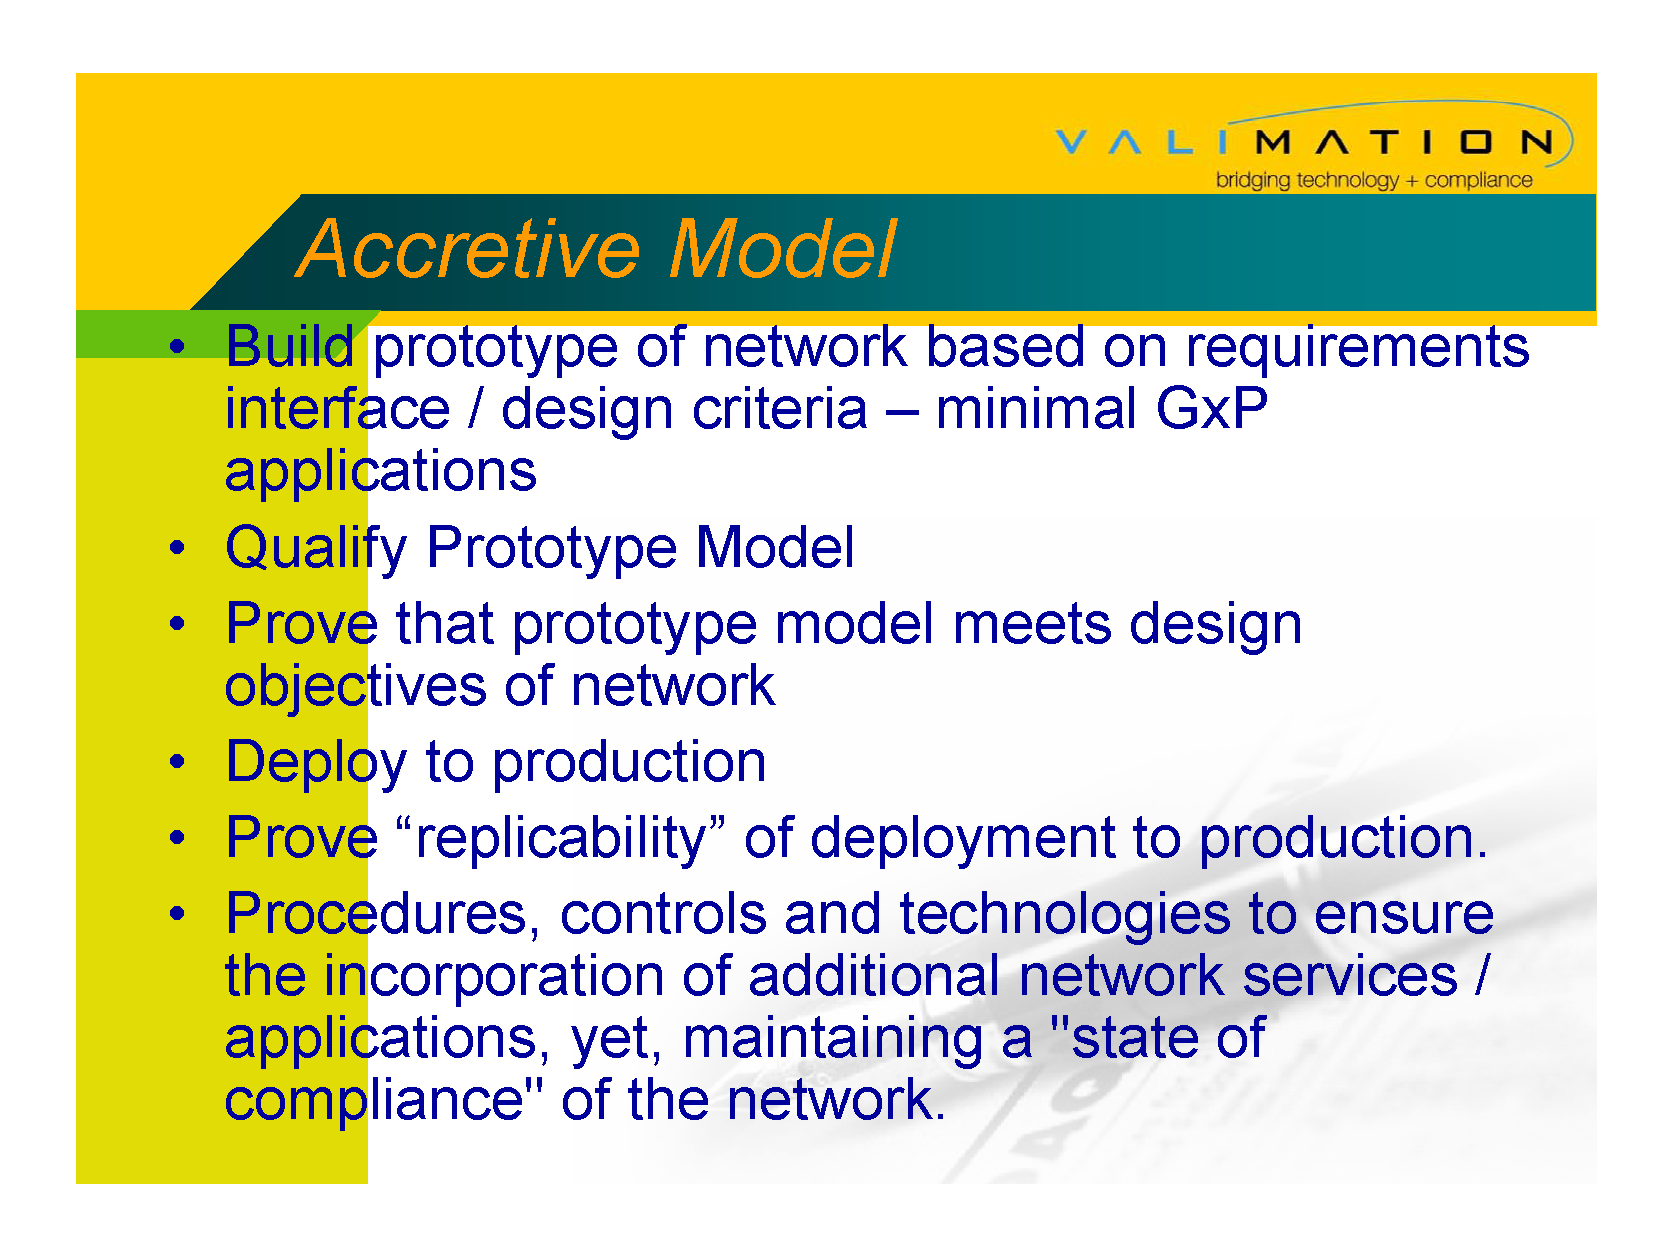 Network Qualification - Accretive Model By ValiMation_Page_22.png